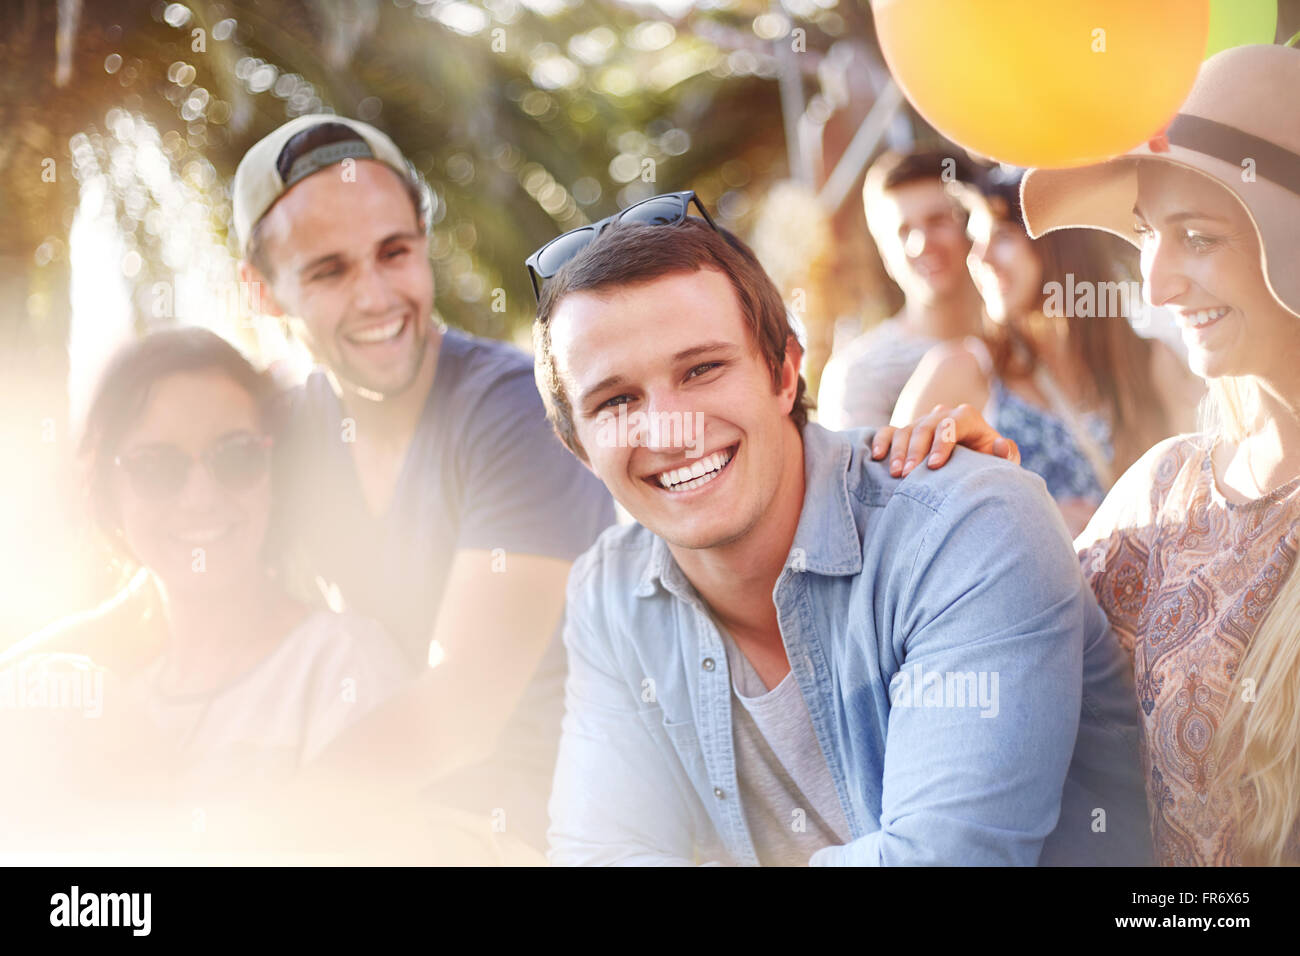 Portrait smiling young man with friends summer outdoors Stock Photo